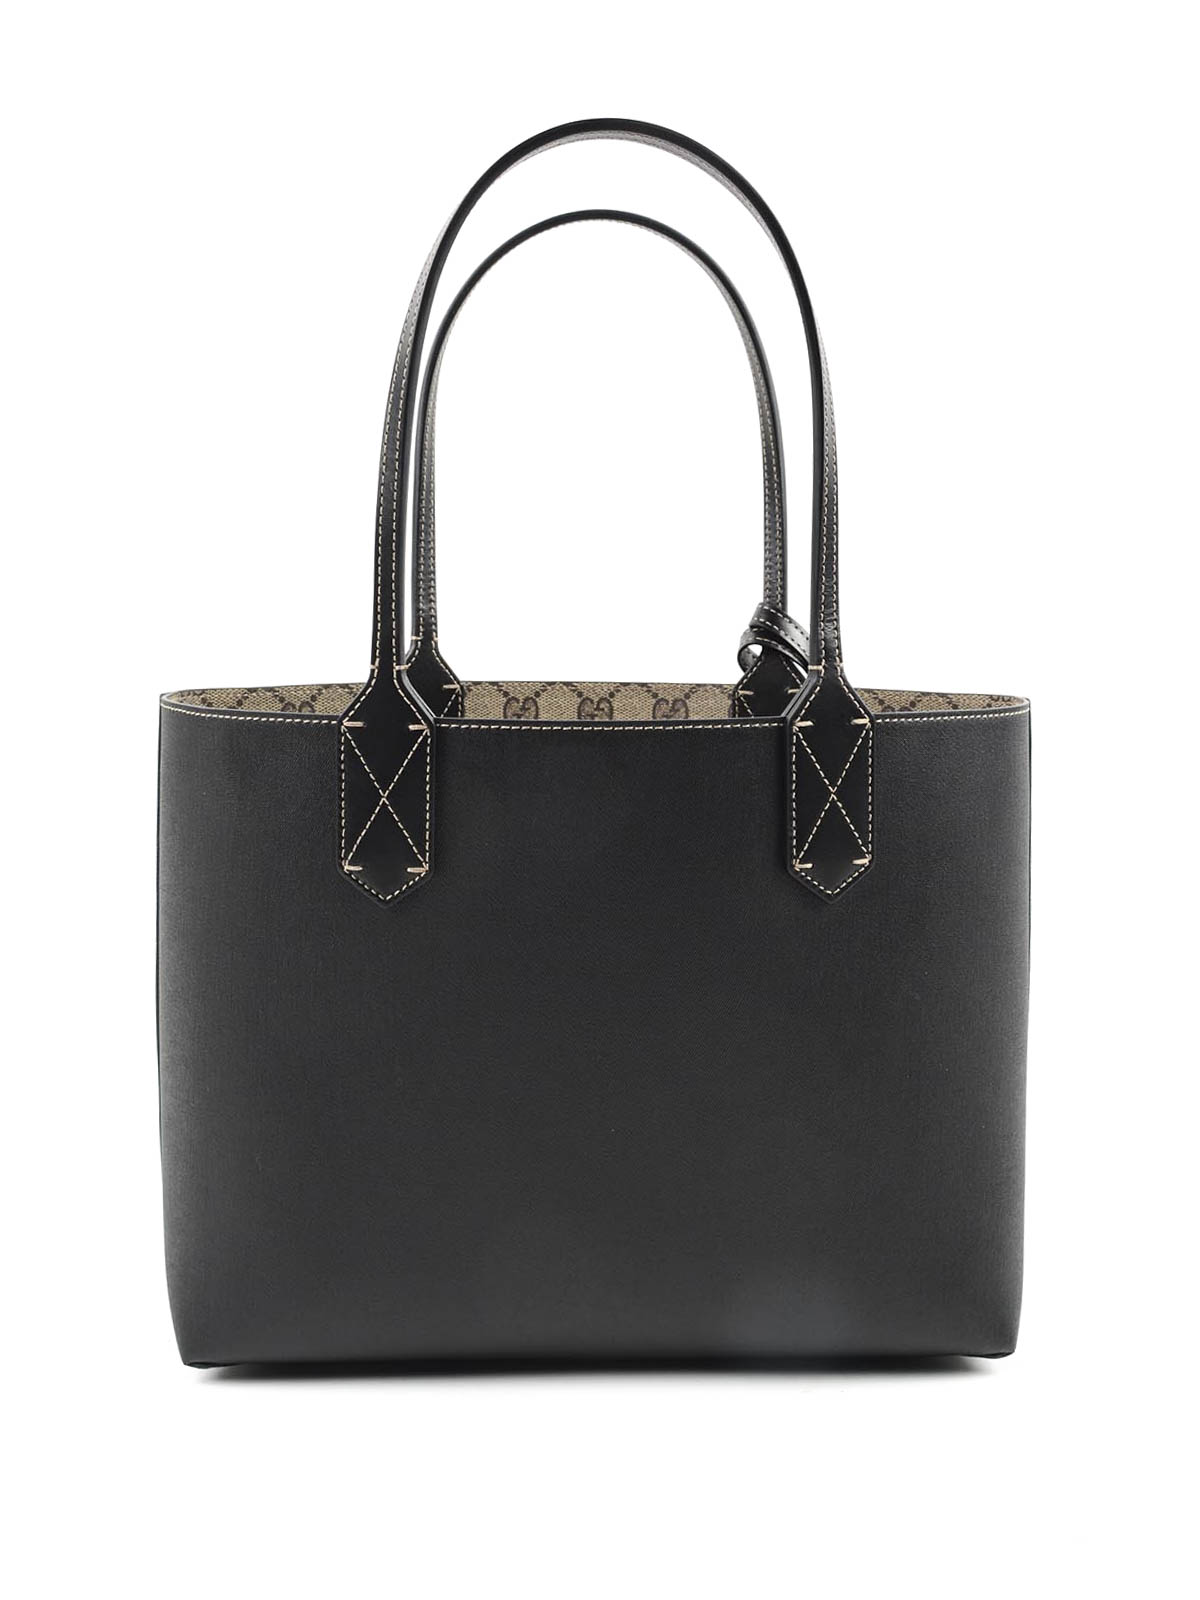 Gucci - Reversible leather tote - totes bags - 372613A98109769